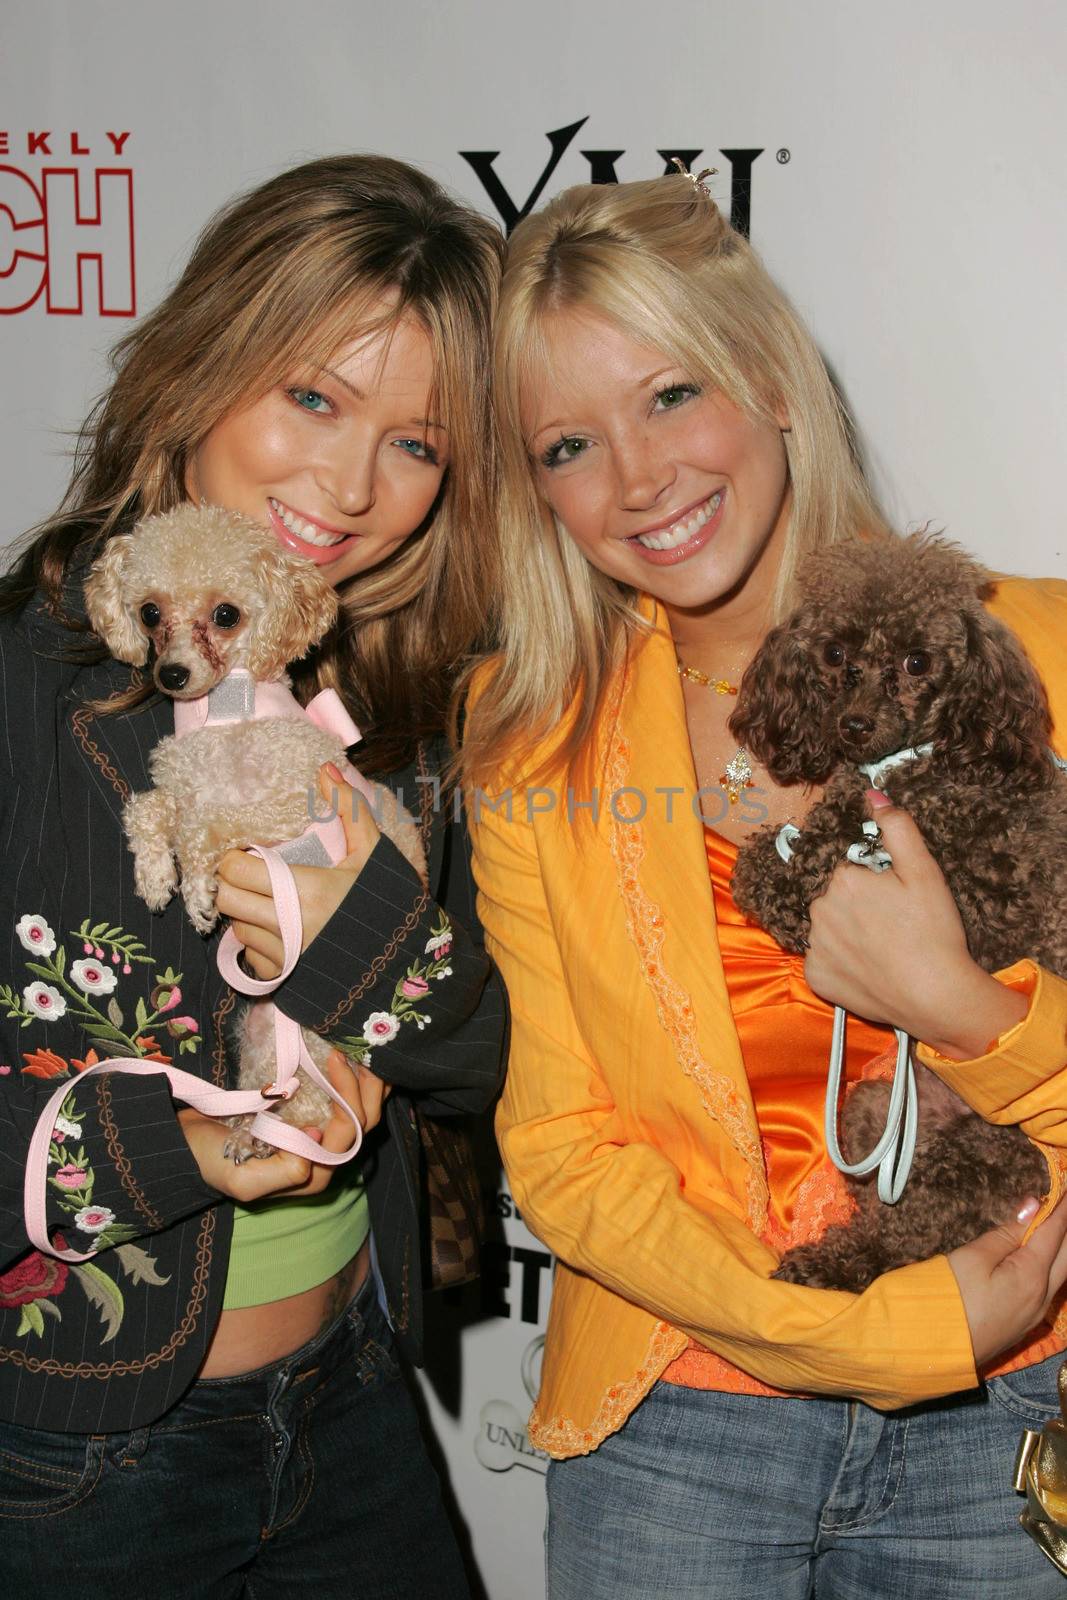 Ashley Peldon and Courtney Peldon at the In Touch Presents Pets And Their Stars Party, Cabana Club, Hollywood, CA 09-21-05